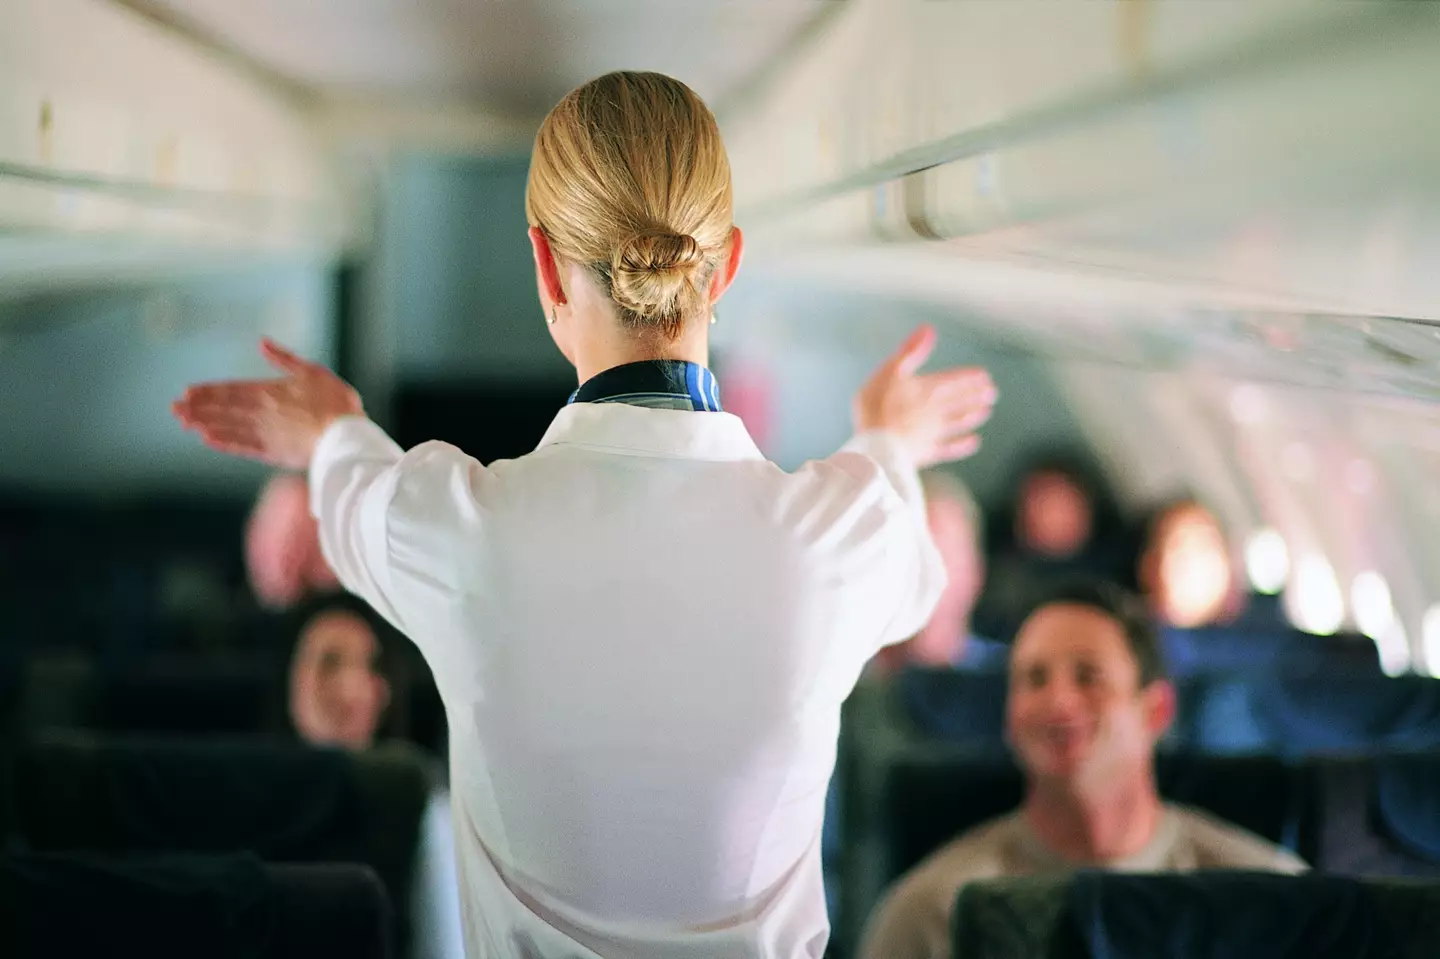 There are numerous ways to win over your cabin crew.